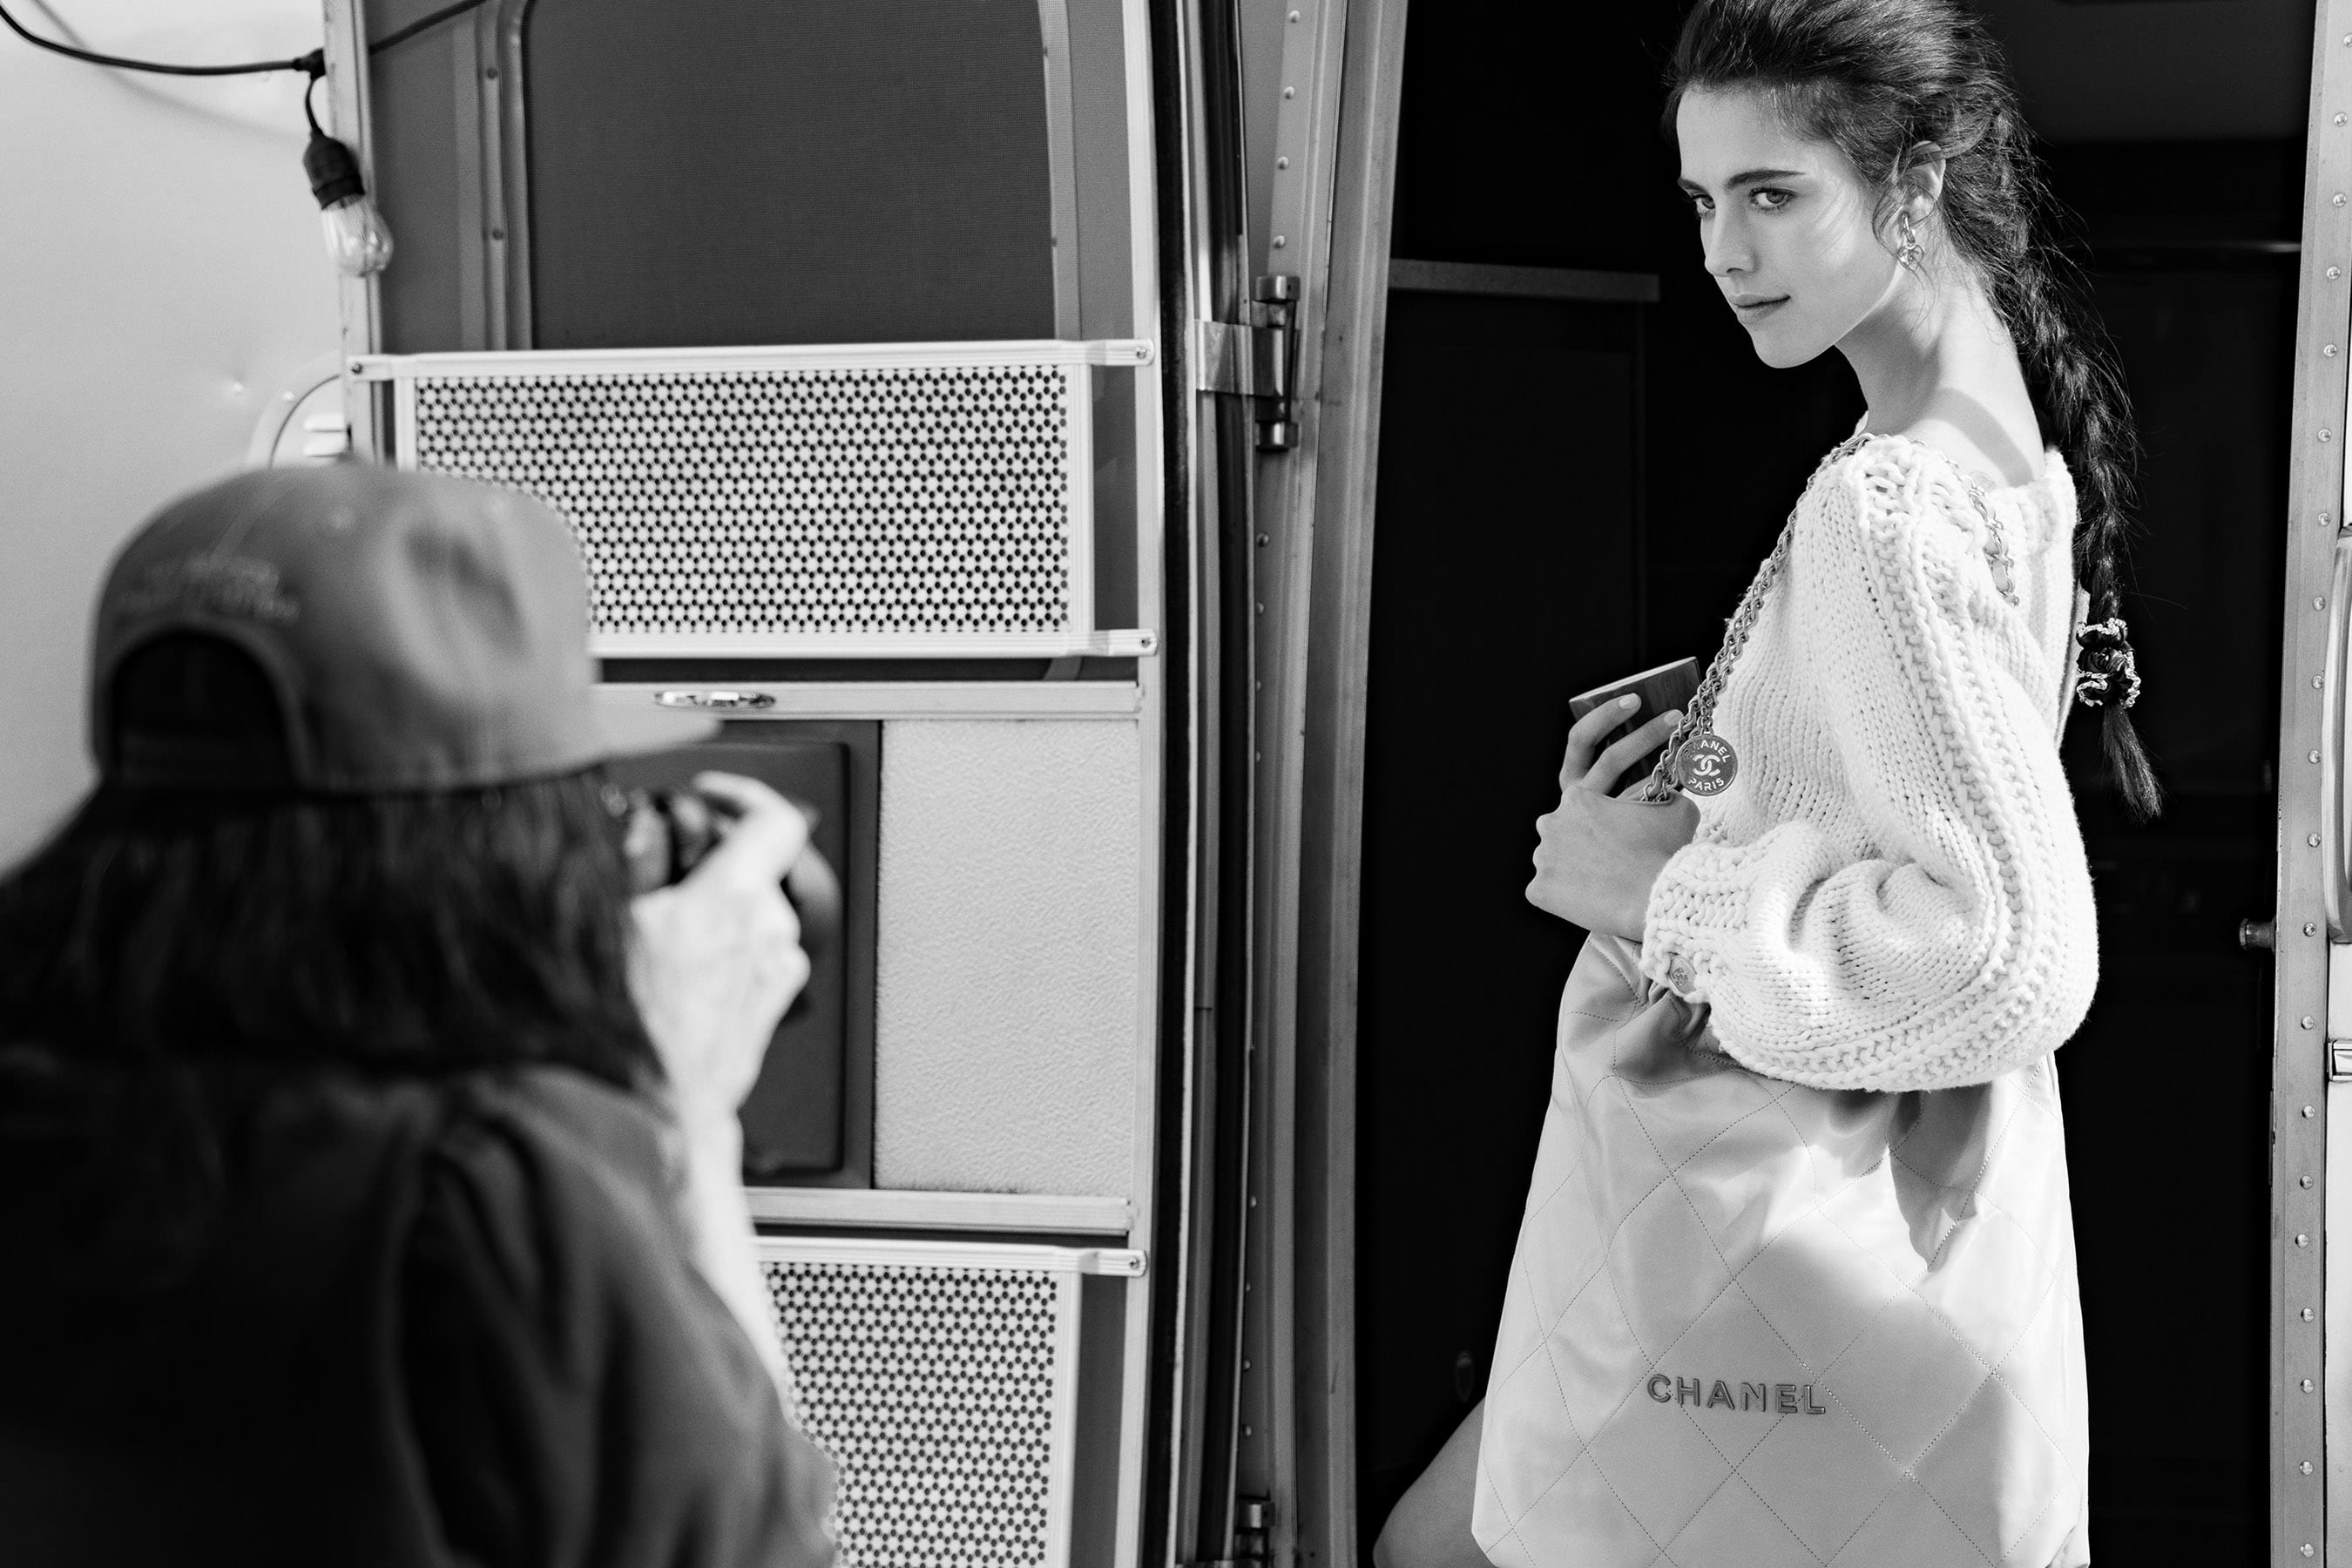 Behind the scenes of the Chanel 22 Bag campaign